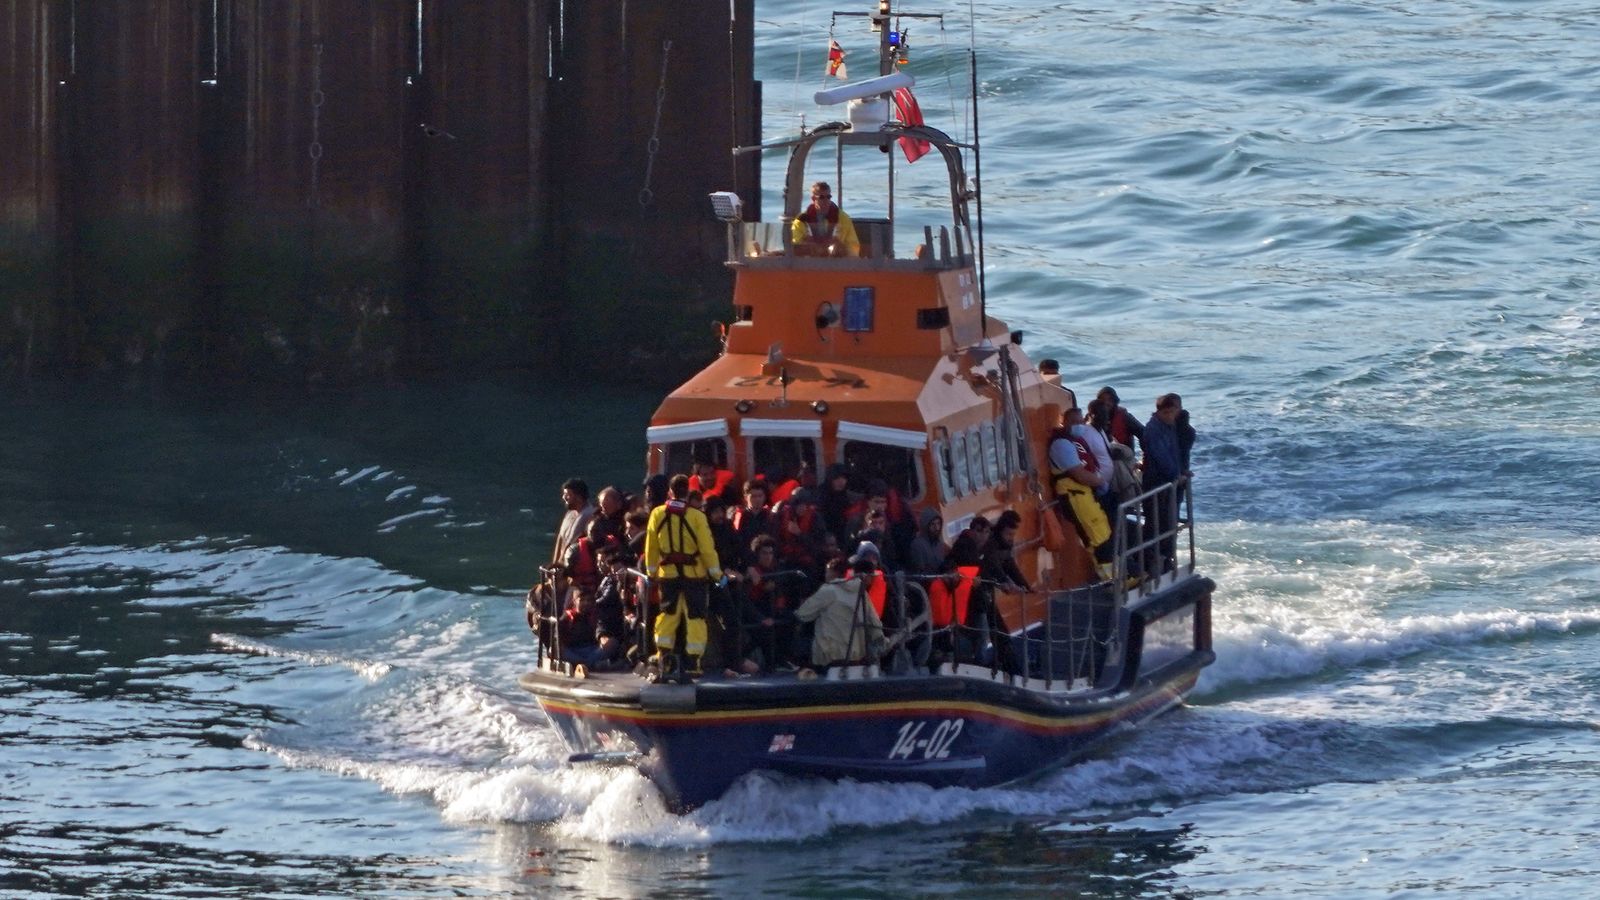 Govt defends immigration strategy after Channel tragedy - as Tory MPs criticise 'dysfunctional' Home Office 